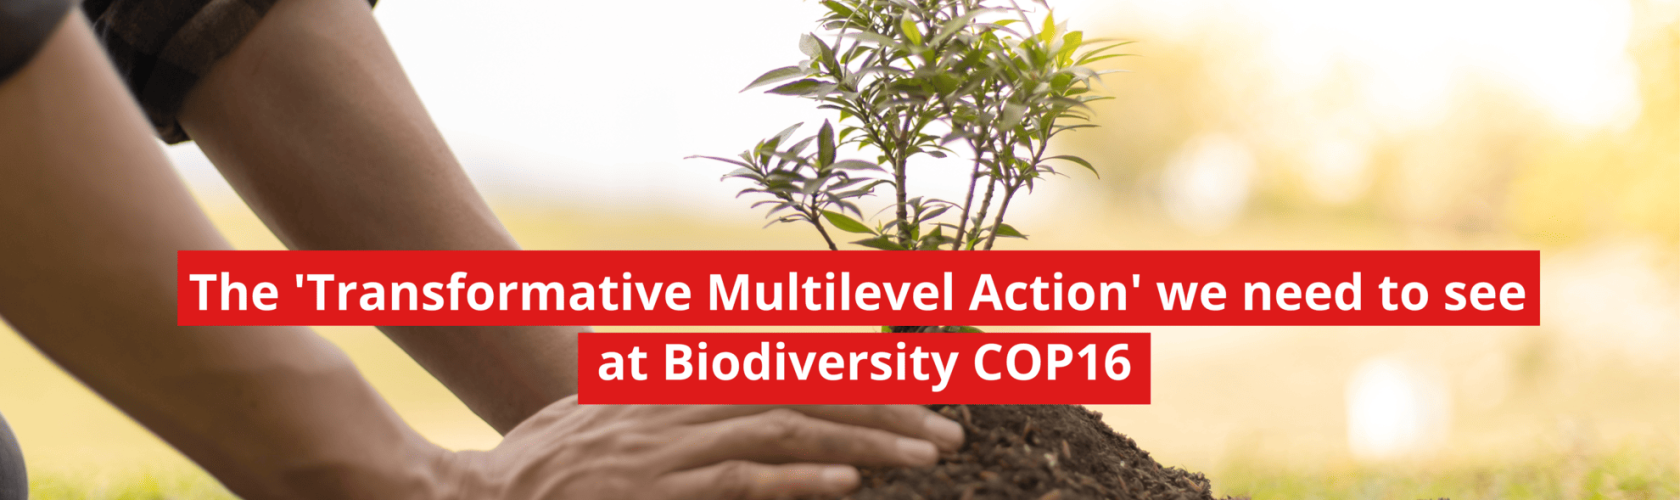 The 'Transformative Multilevel Action' we need to see at Biodiversity COP16